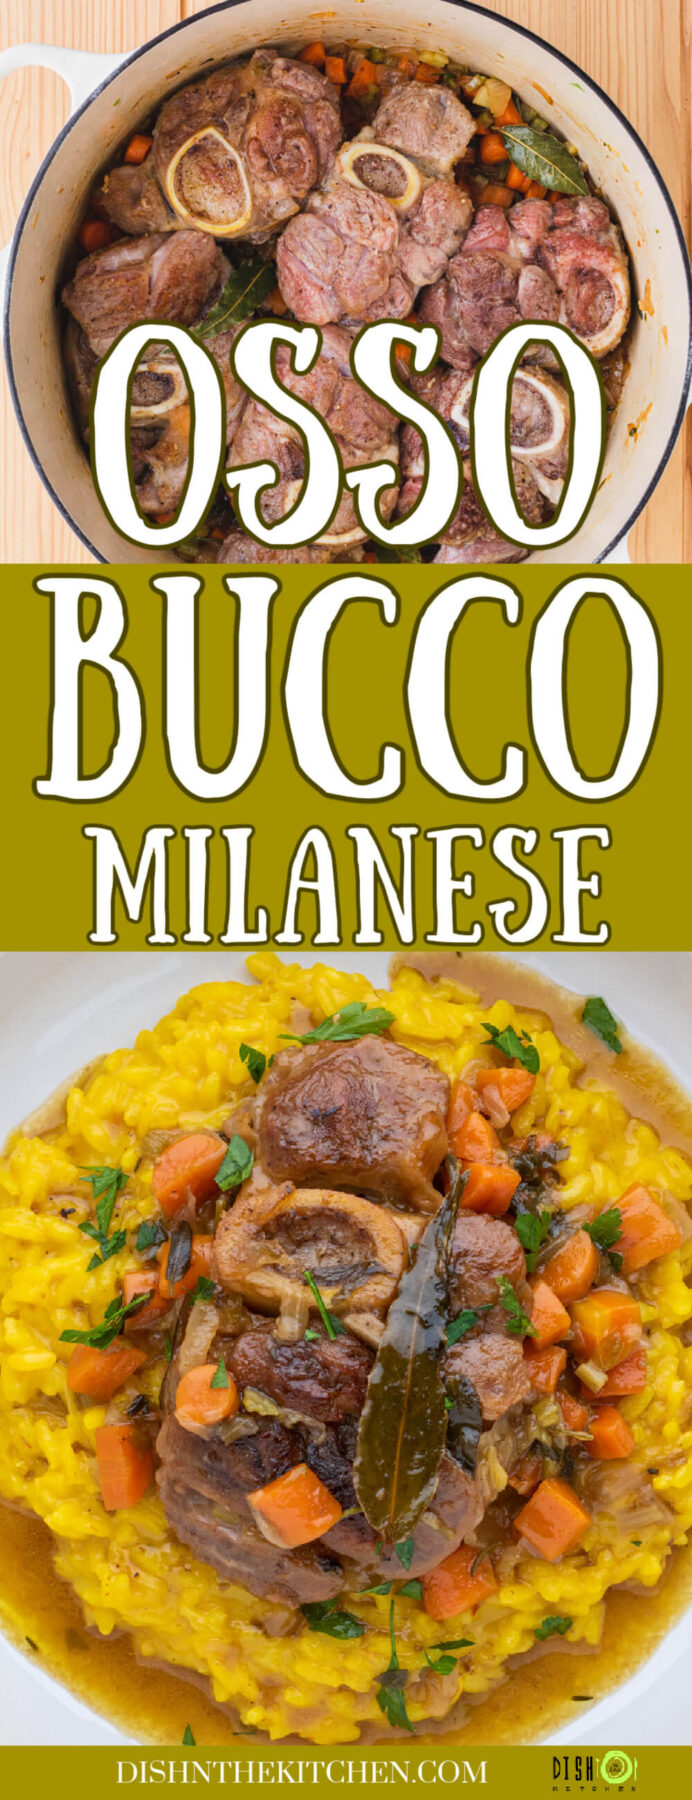 Pinterest image of a slow cooked veal Osso Bucco served on top of vibrant yellow bed of saffron risotto Milanese.